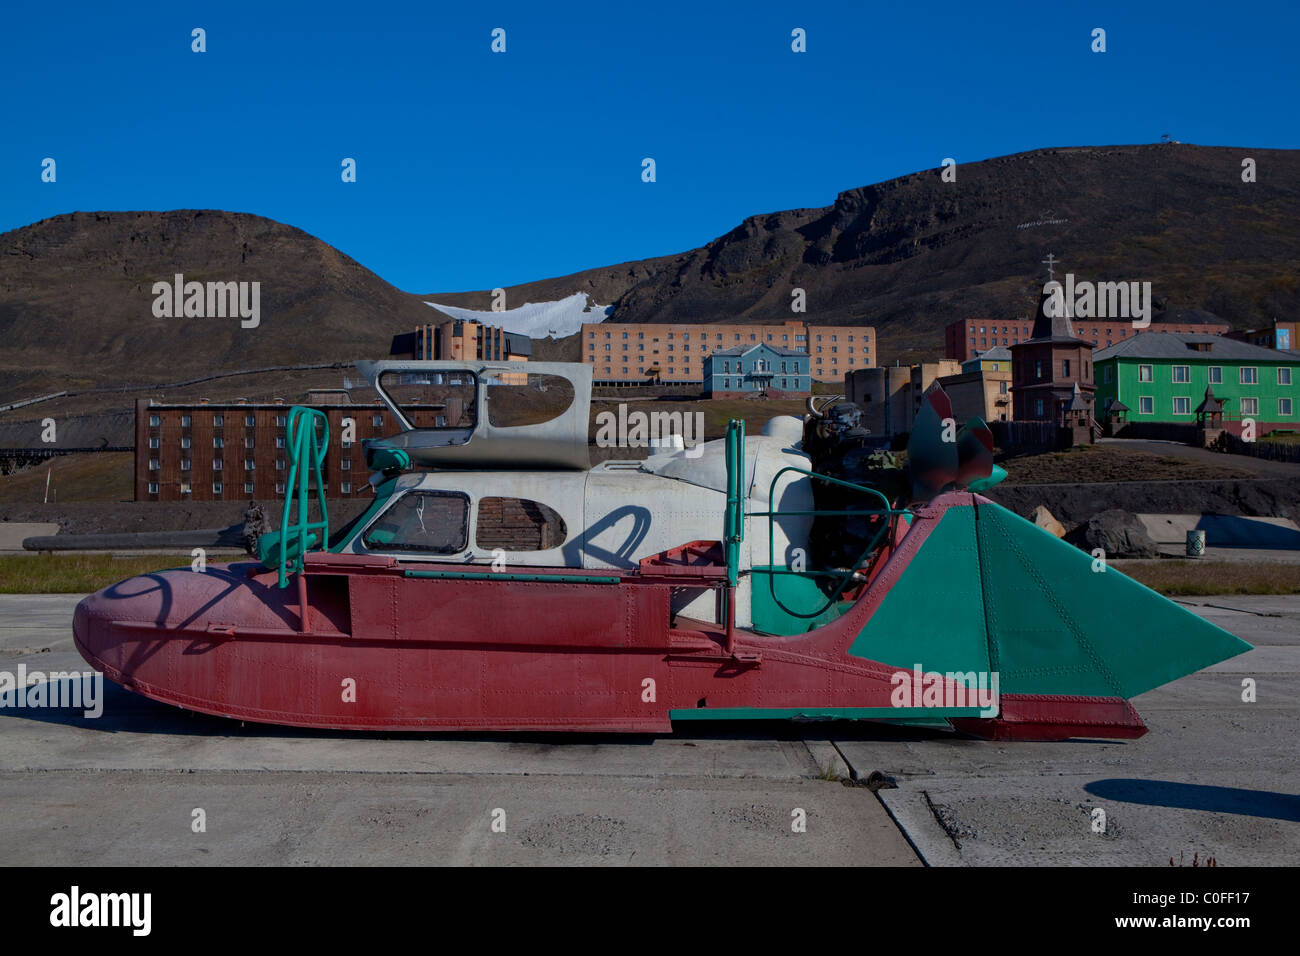 Home-made space car in Barentsburg, a Russian coal mining town in the Norwegian Archipelego of Svalbard. Stock Photo